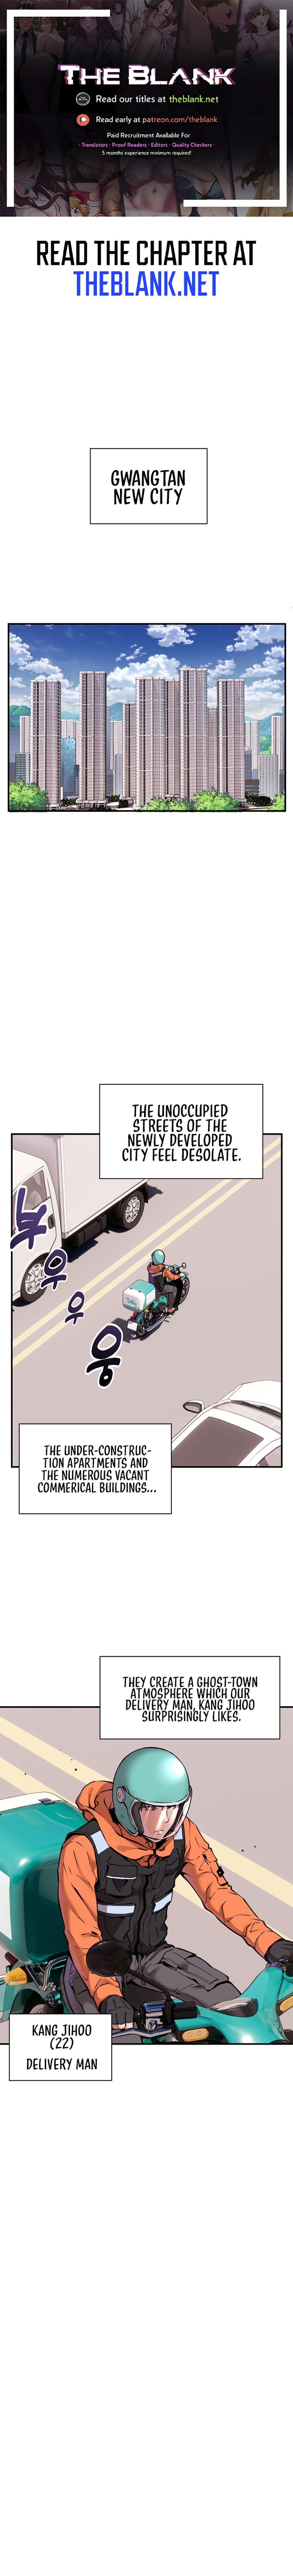 driver-in-the-new-city-chap-1-0